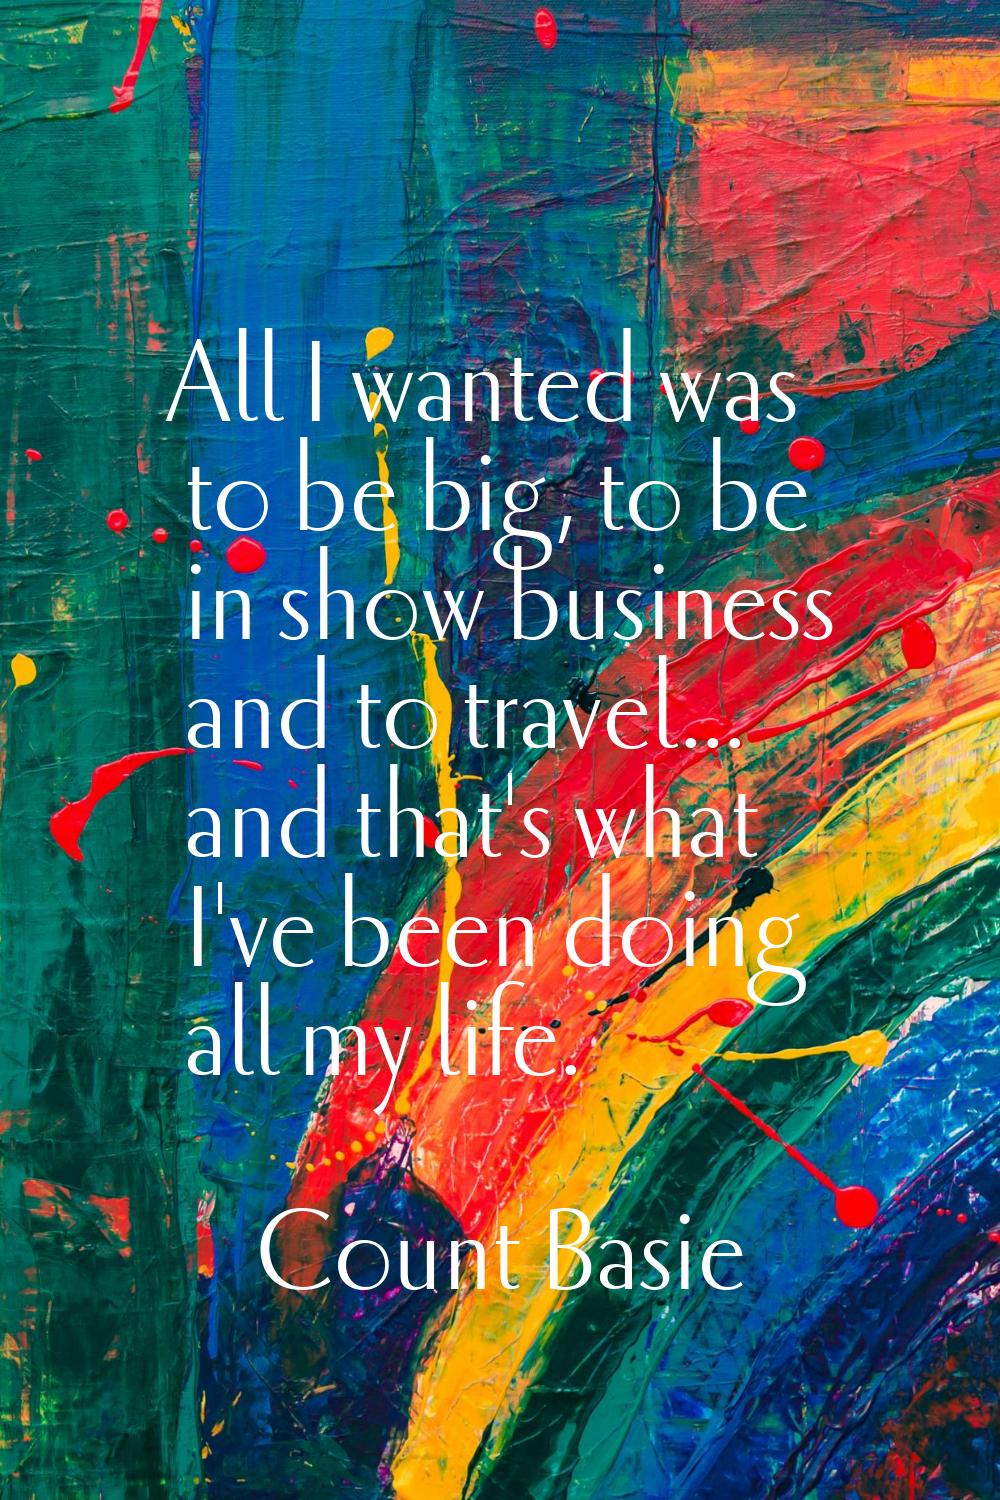 All I wanted was to be big, to be in show business and to travel... and that's what I've been doing